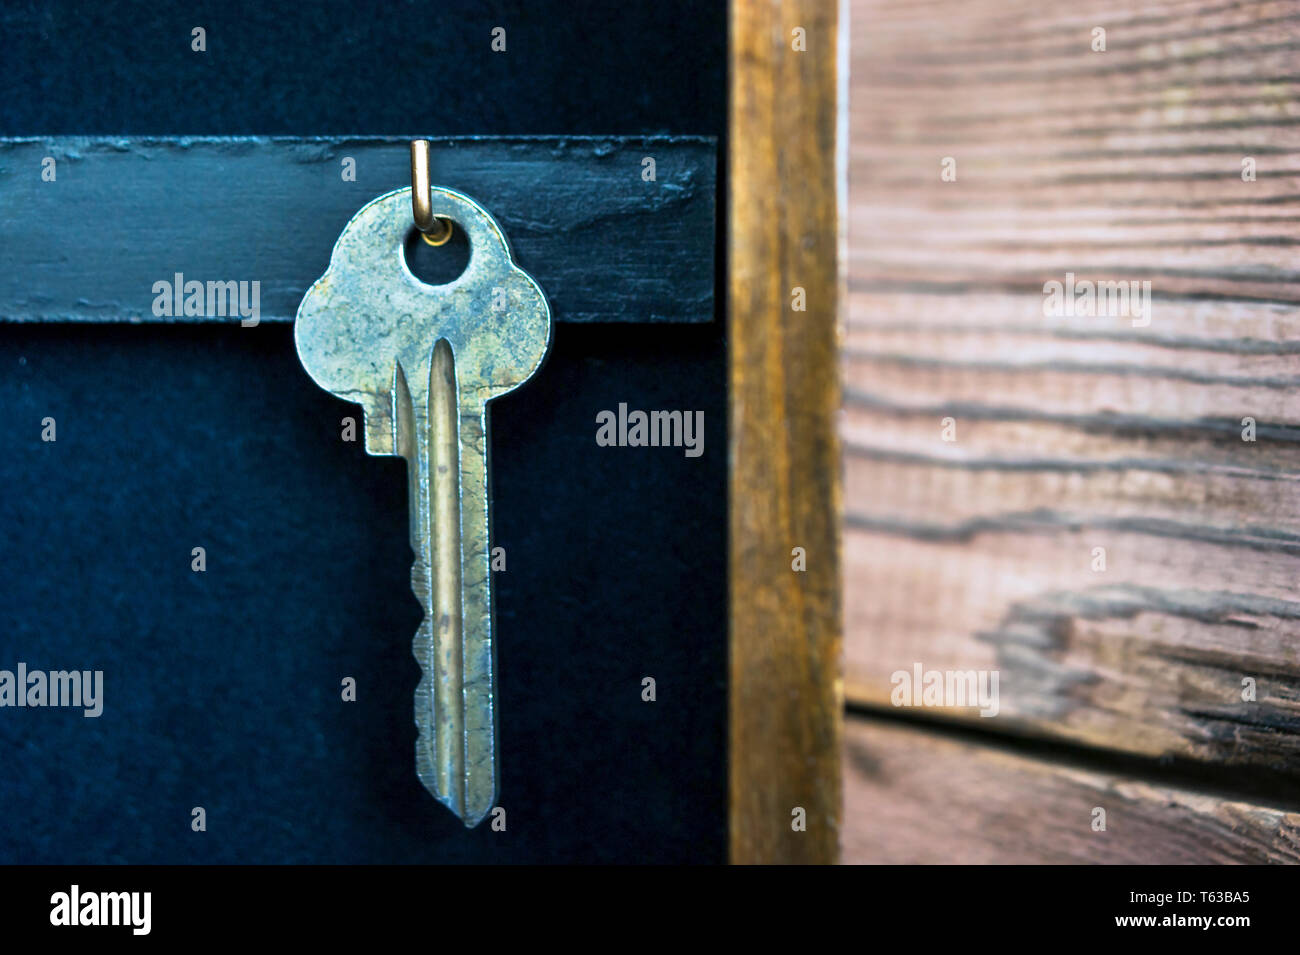 A Key Hanging On A Golden Hook In A Wall Key Holder On Rustic